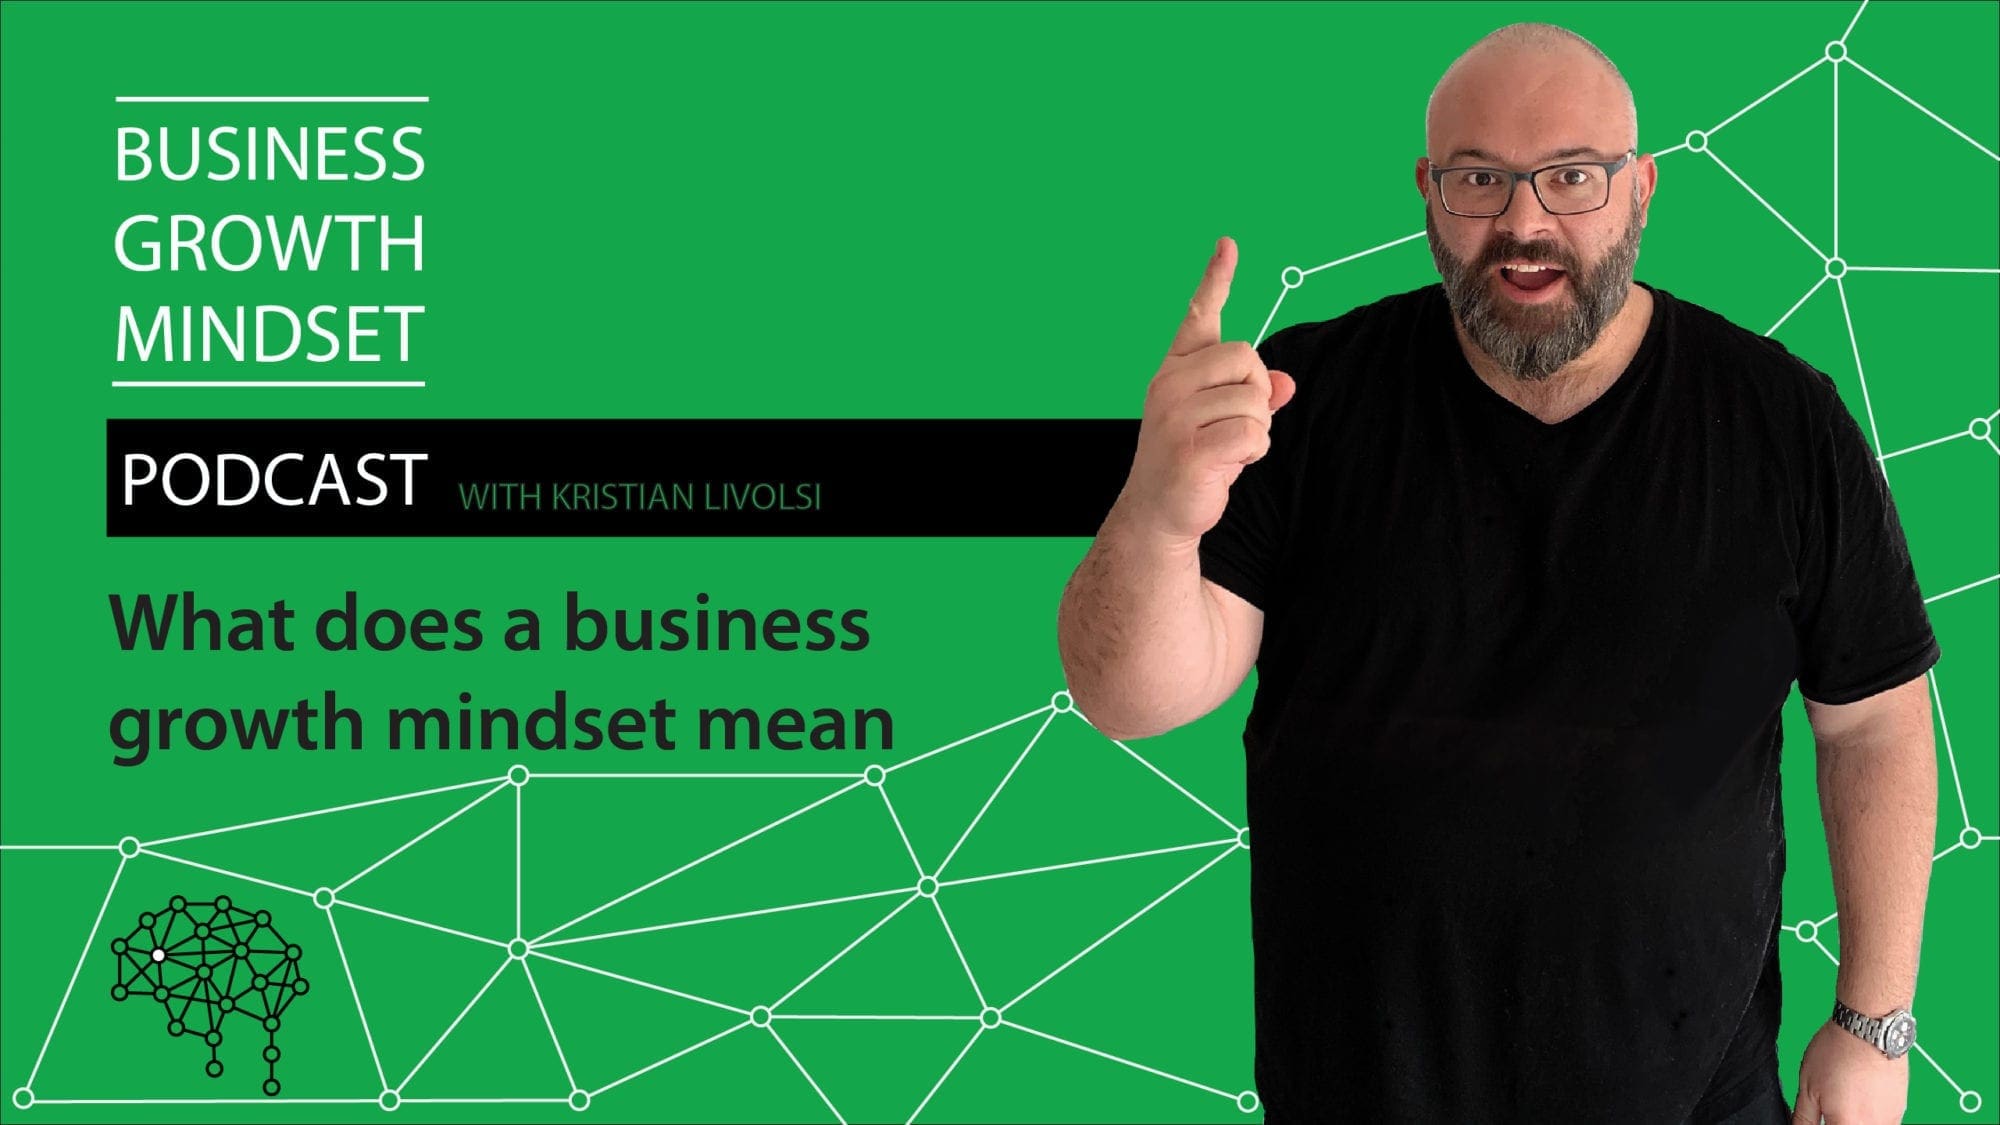 Business Growth Mindset Podcast - What does a business growth mindset mean